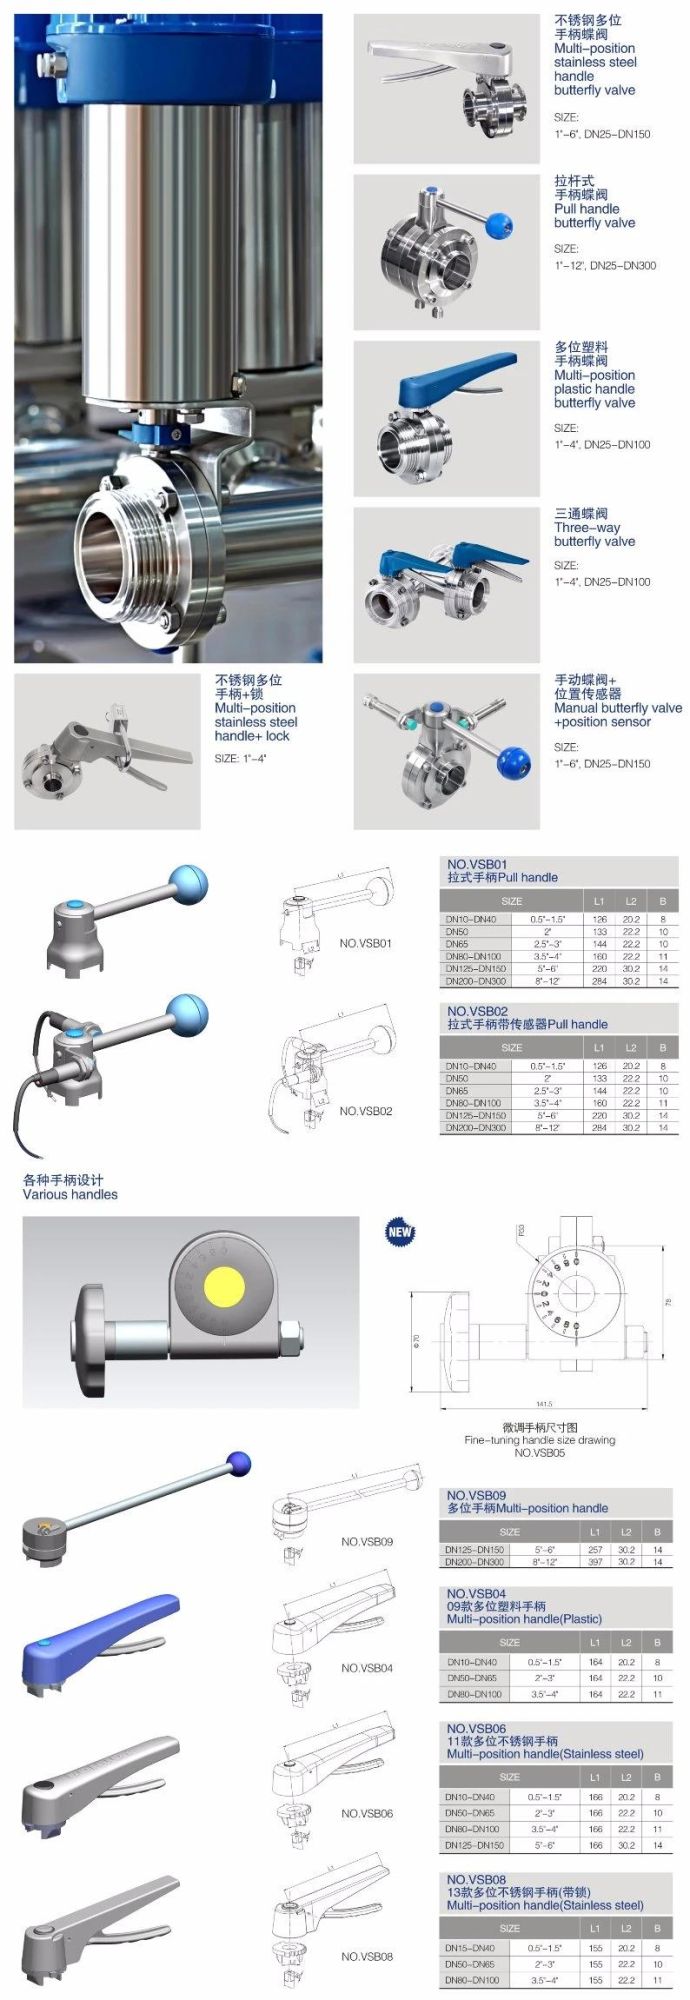 Clamp Pneuamtic Butterfly Valve with Position Sensor for Food Processing